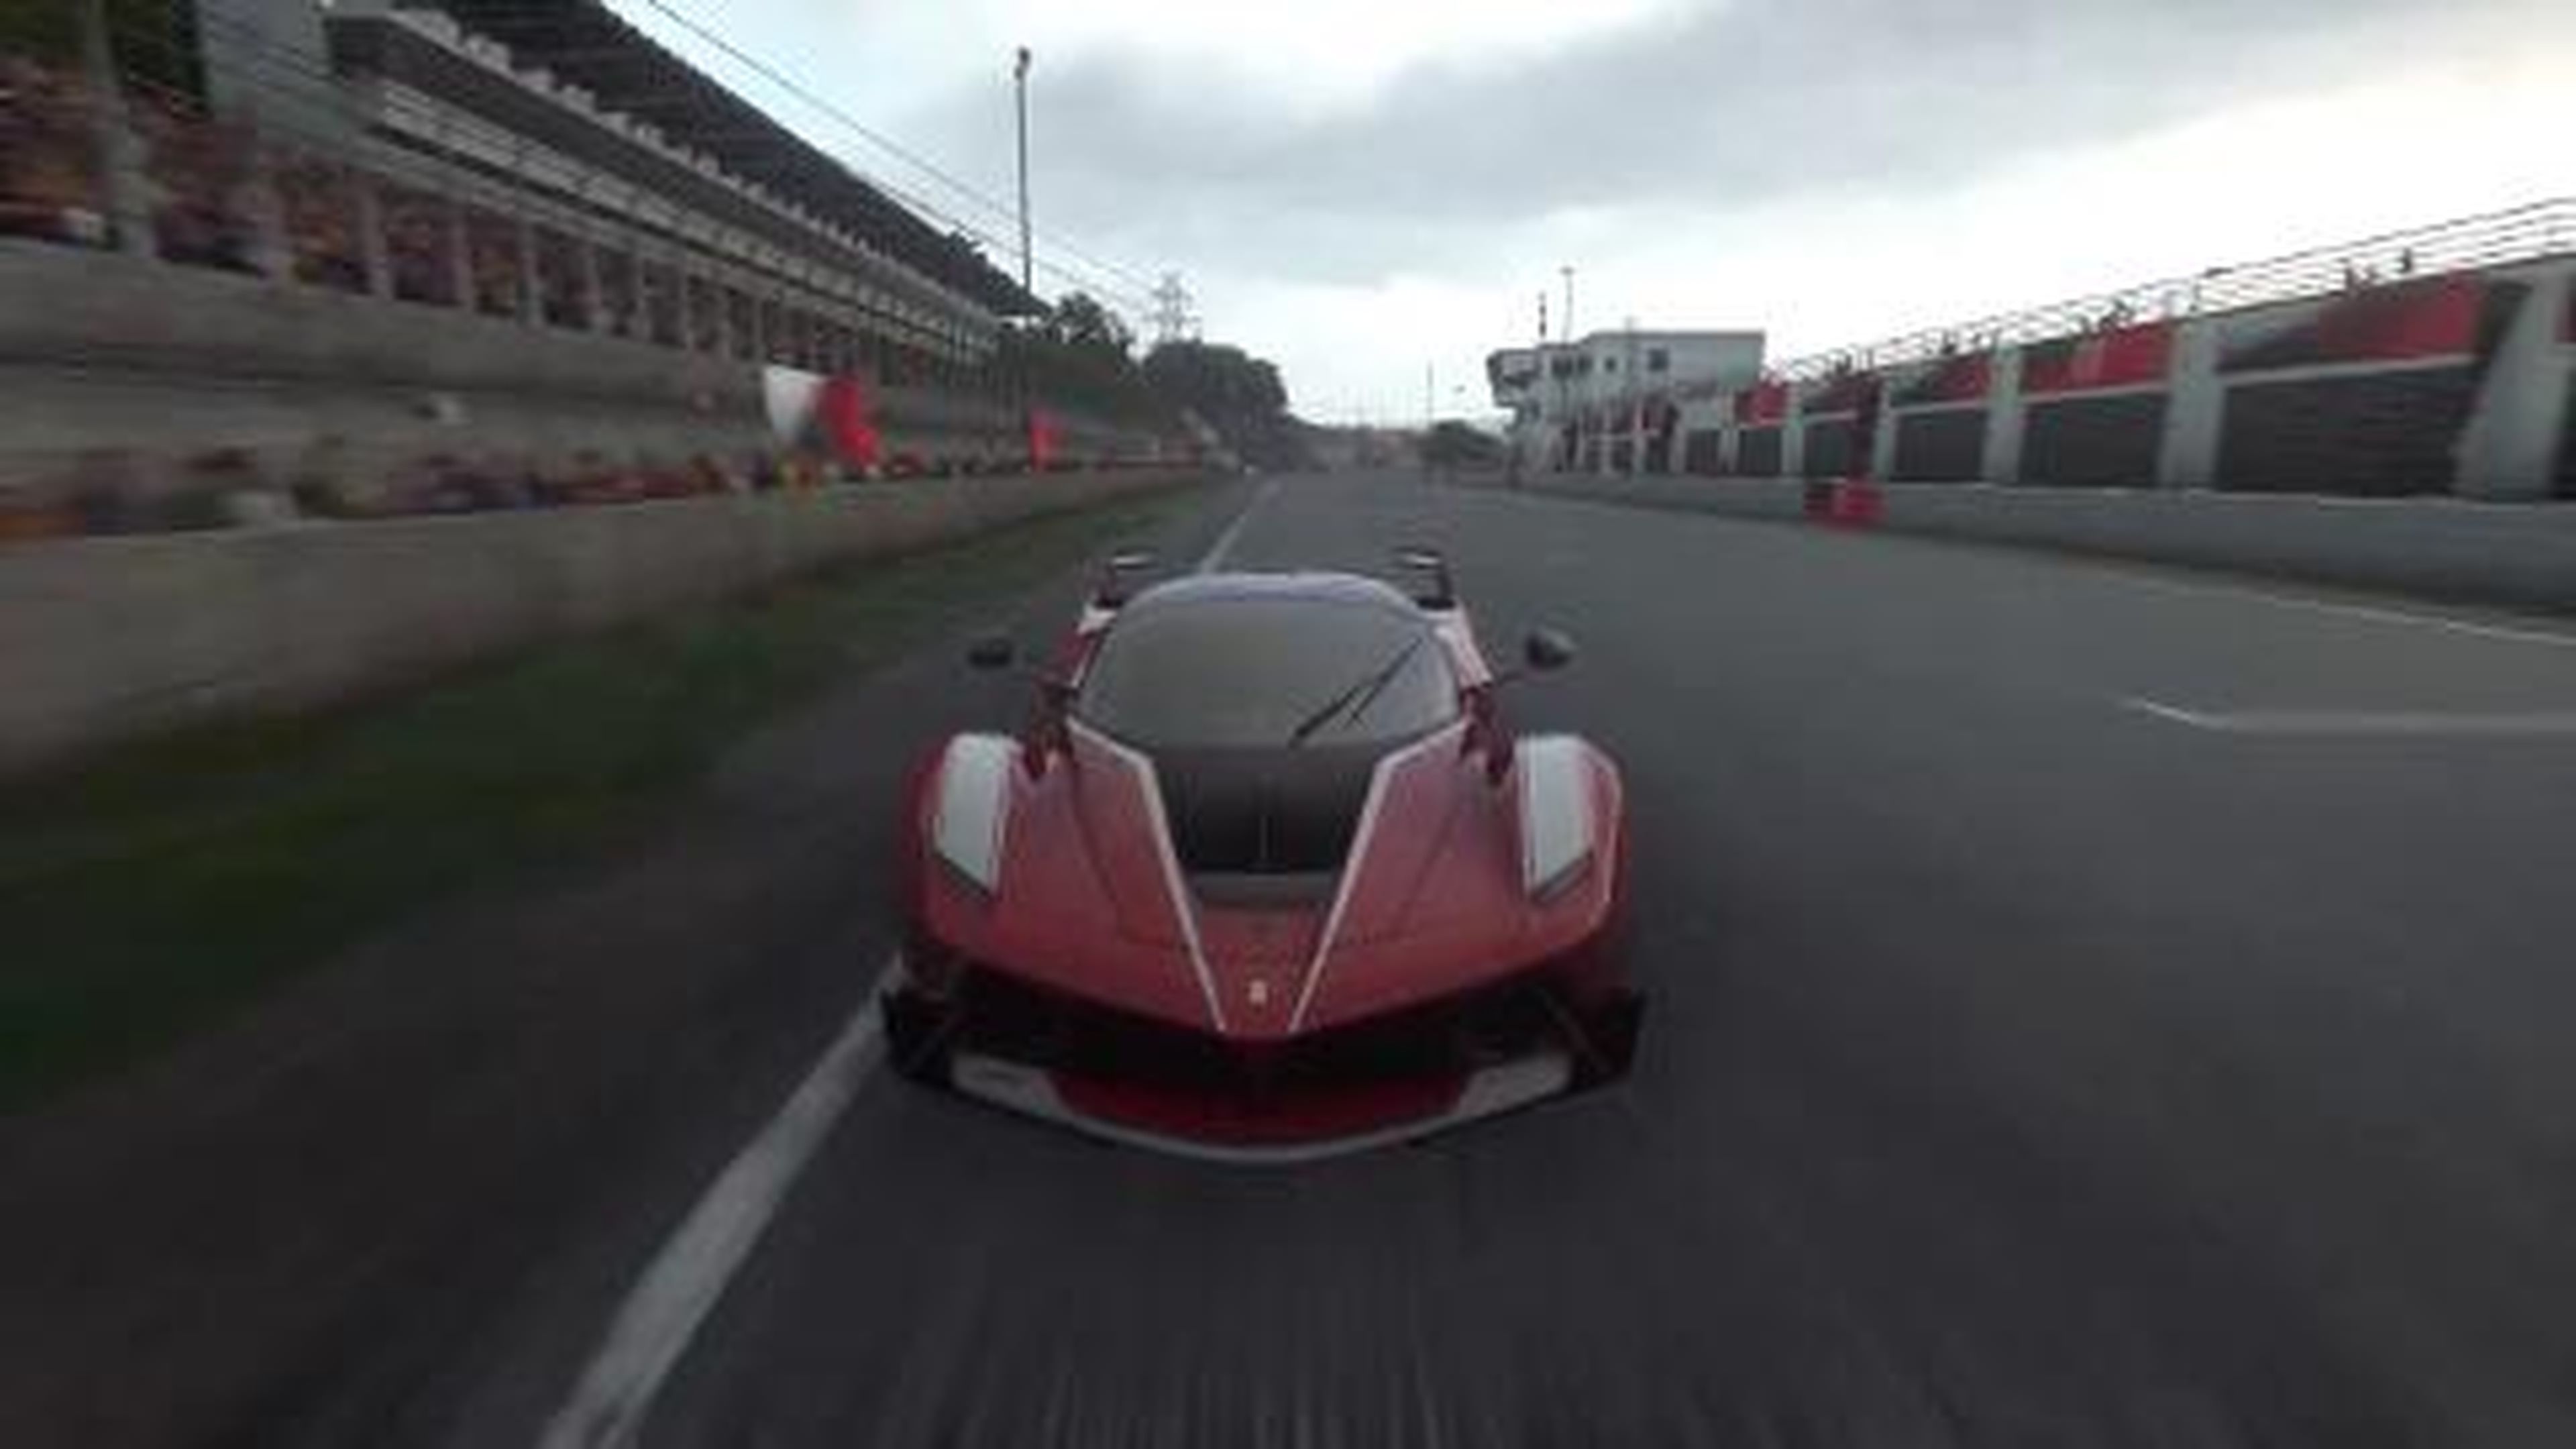 DRIVECLUB PS4 - Ferrari FXX K Gameplay Preview